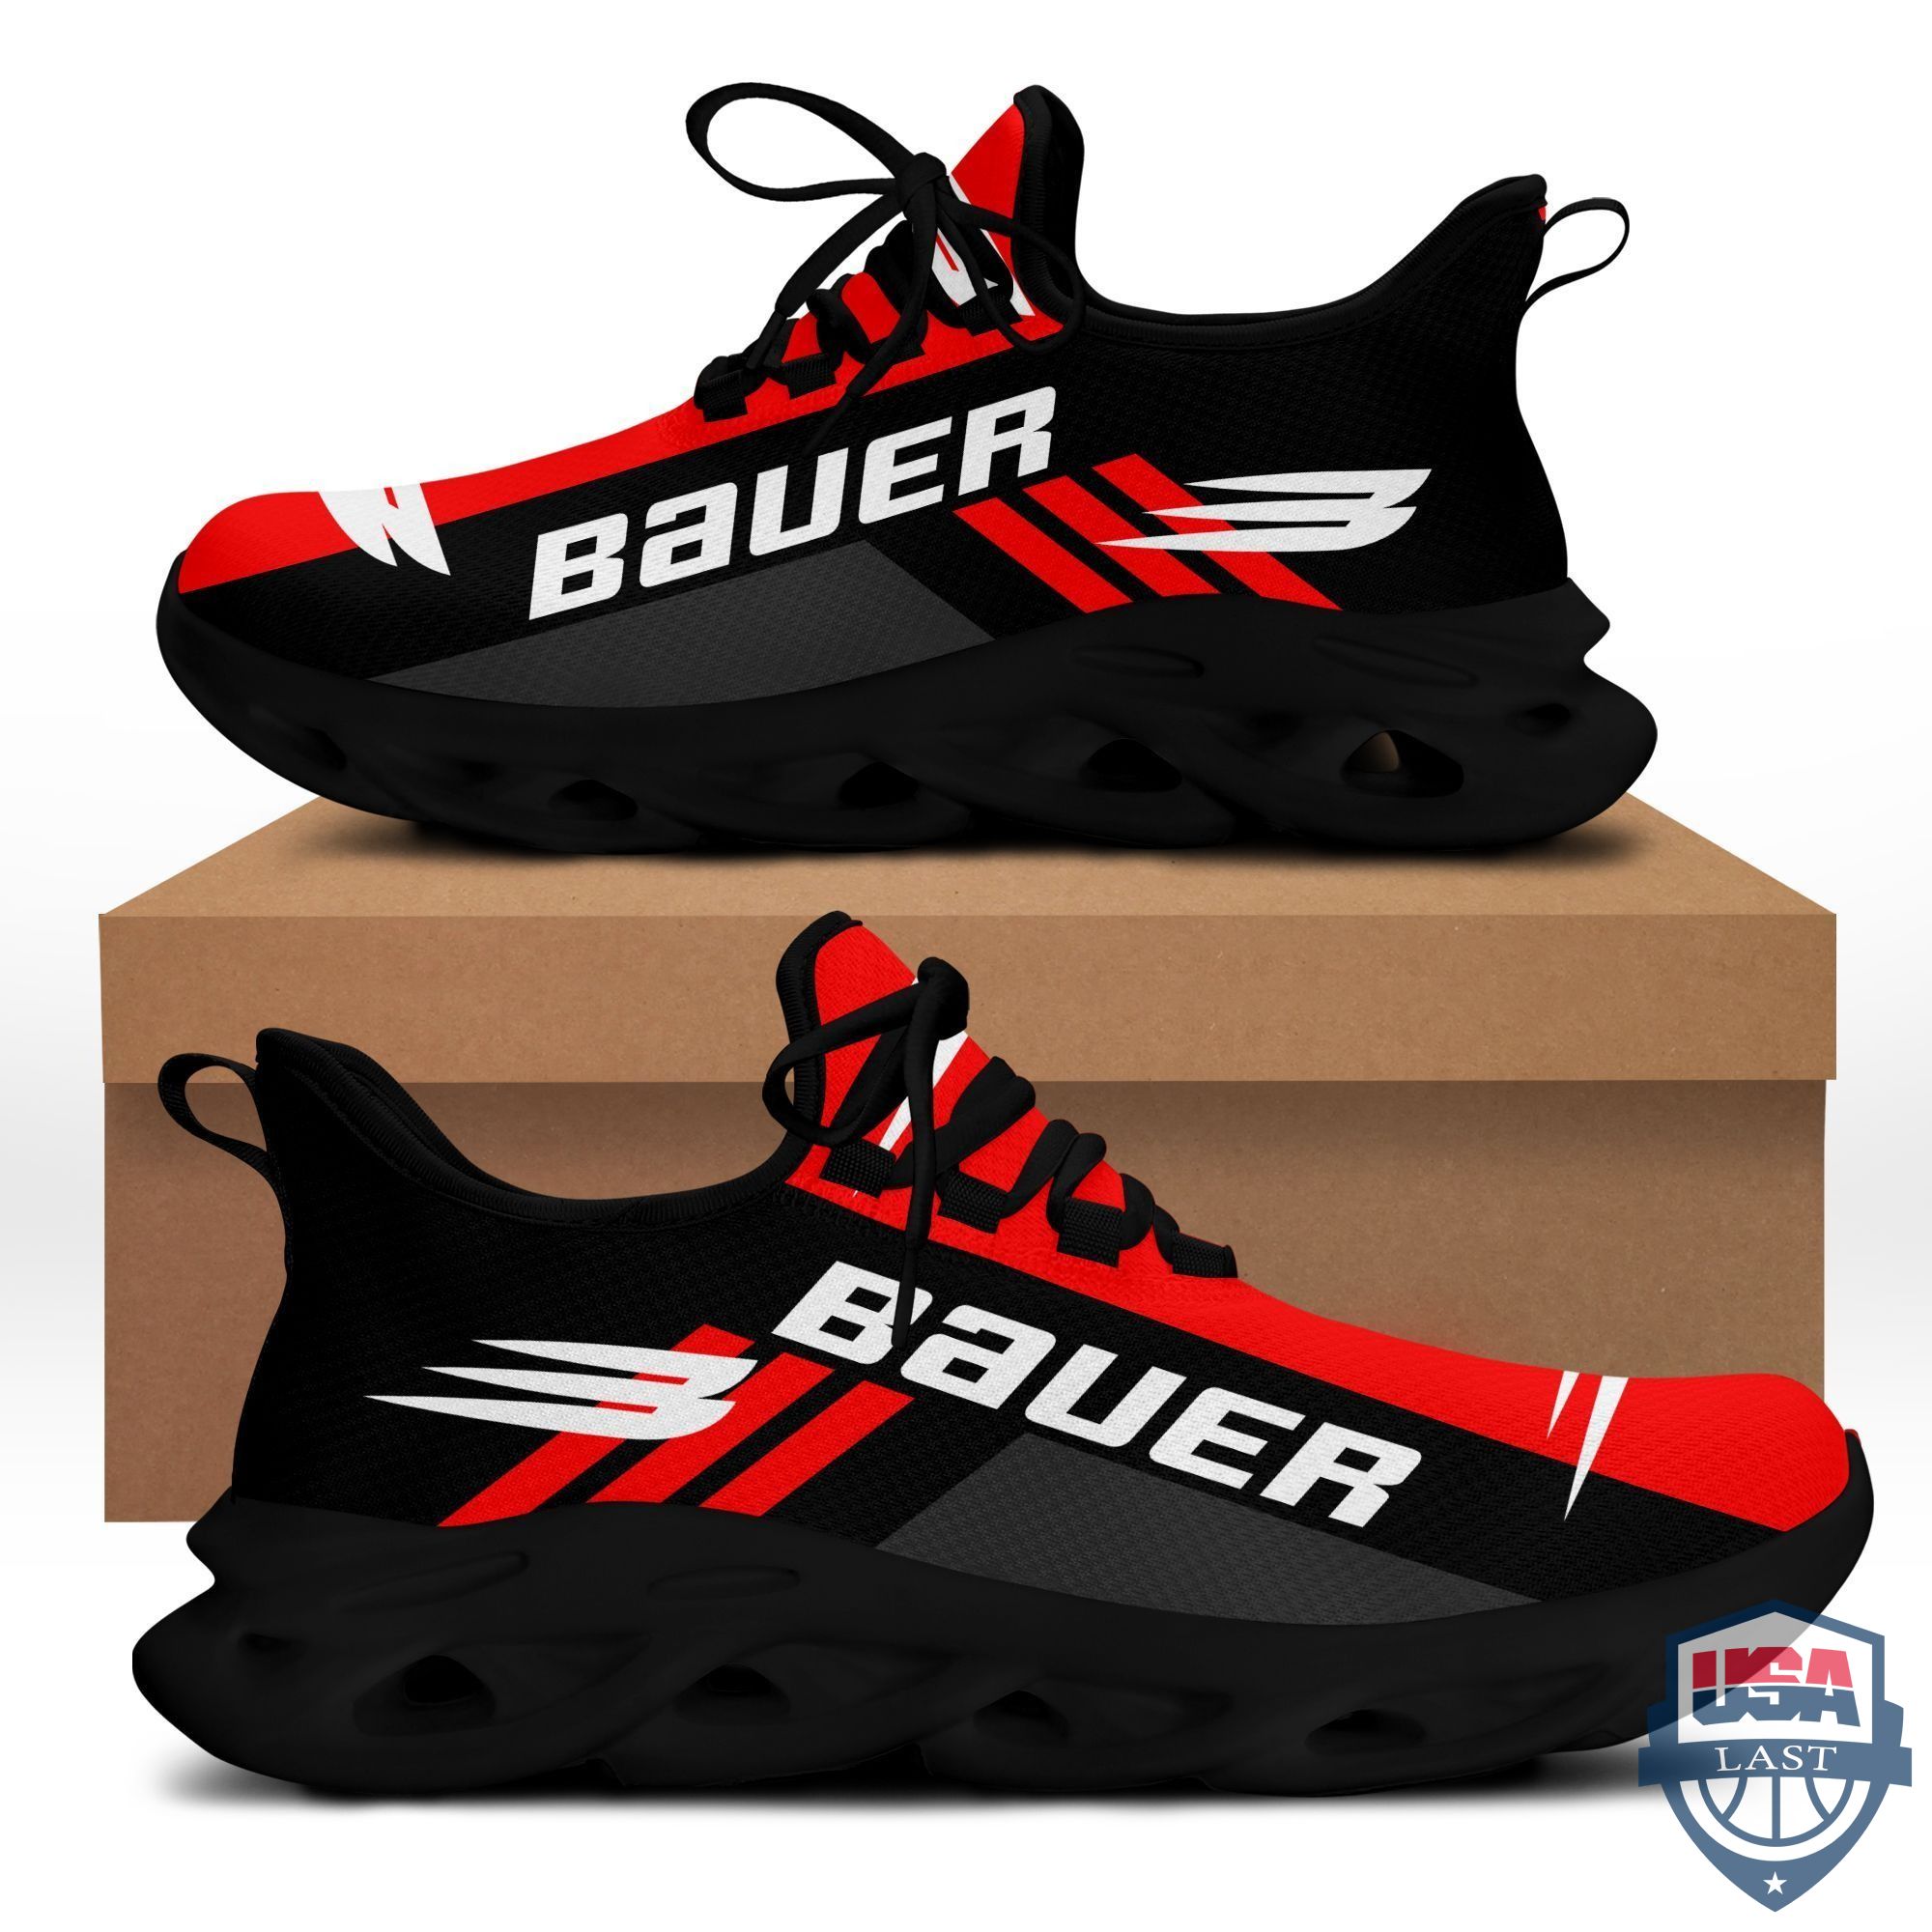 Top Trending – Bauer Max Soul Shoes Red Version